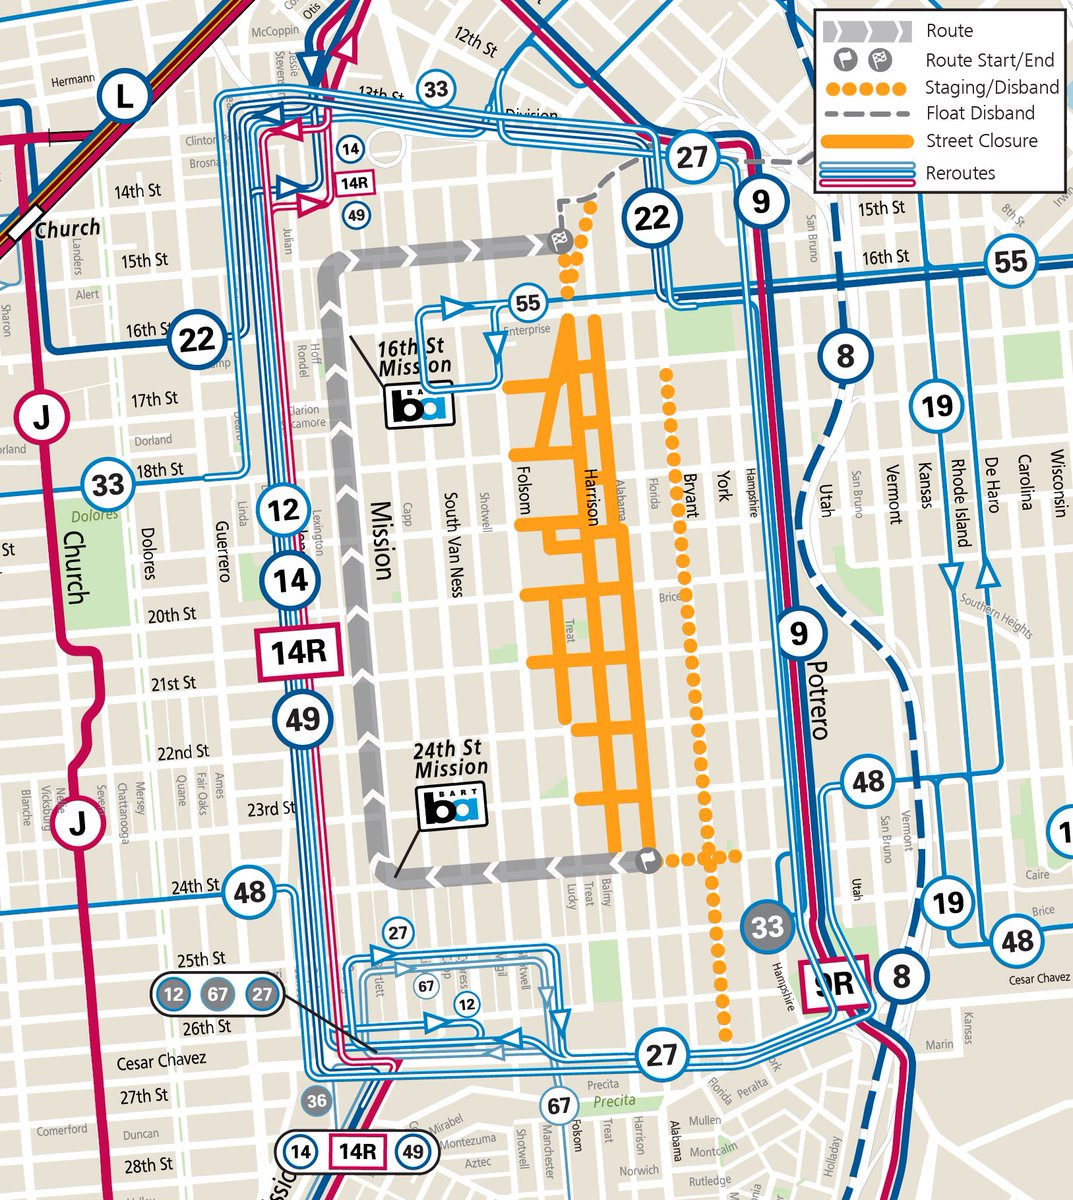 Transit riders who use 16th St Mission and 24th St Mission BART stations may see various Muni bus routes rerouted this Sunday due to @carnavalsf. BART service will not be impacted by Carnaval. 